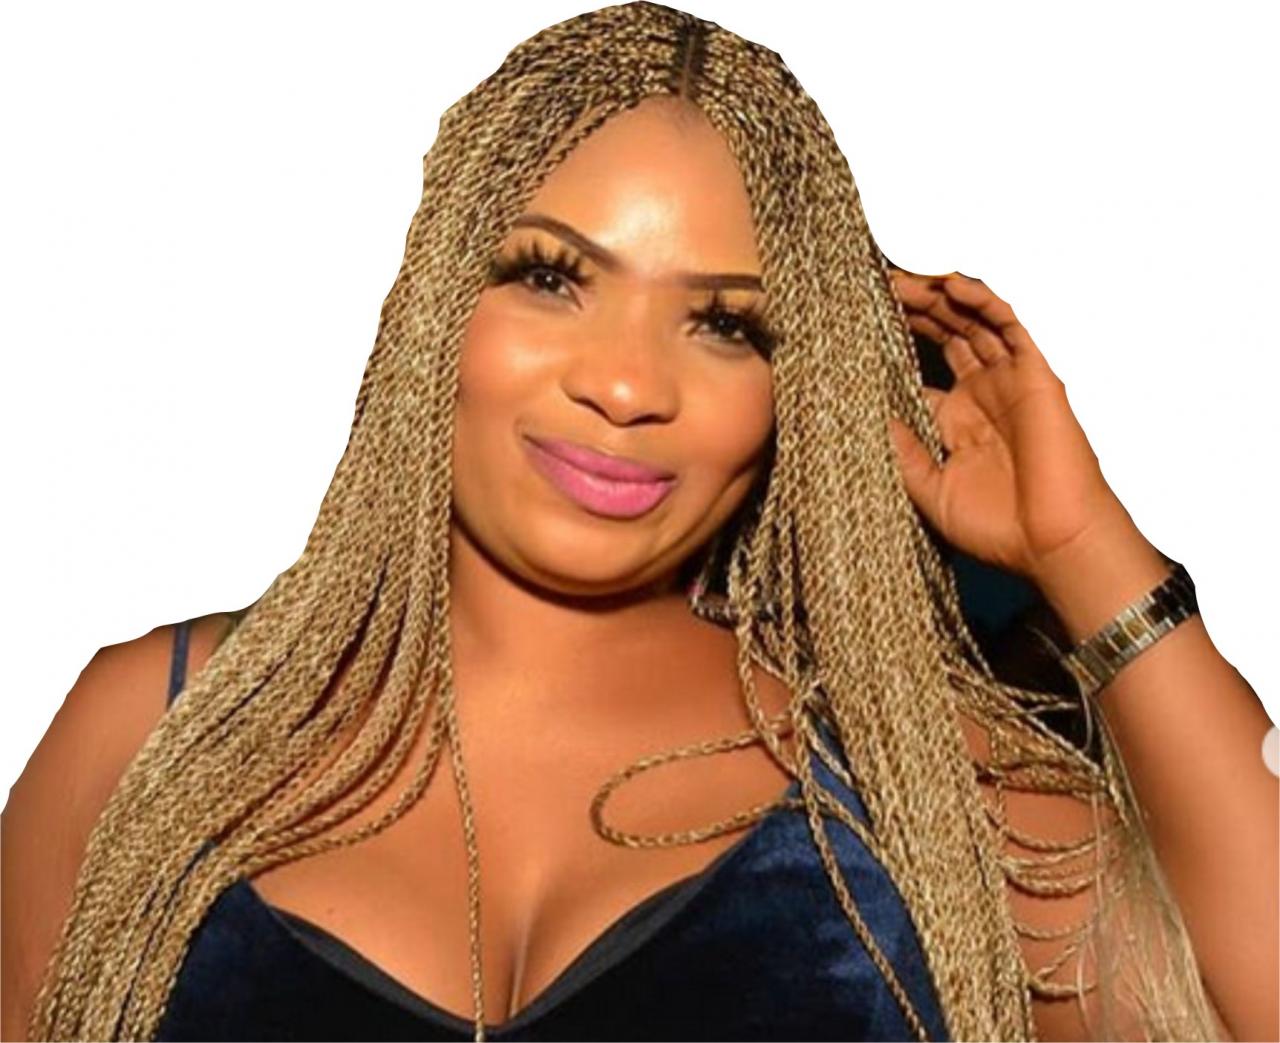 List Of Men Yoruba Actress Laide Bakare Has Slept With- Bloggers Drops Info